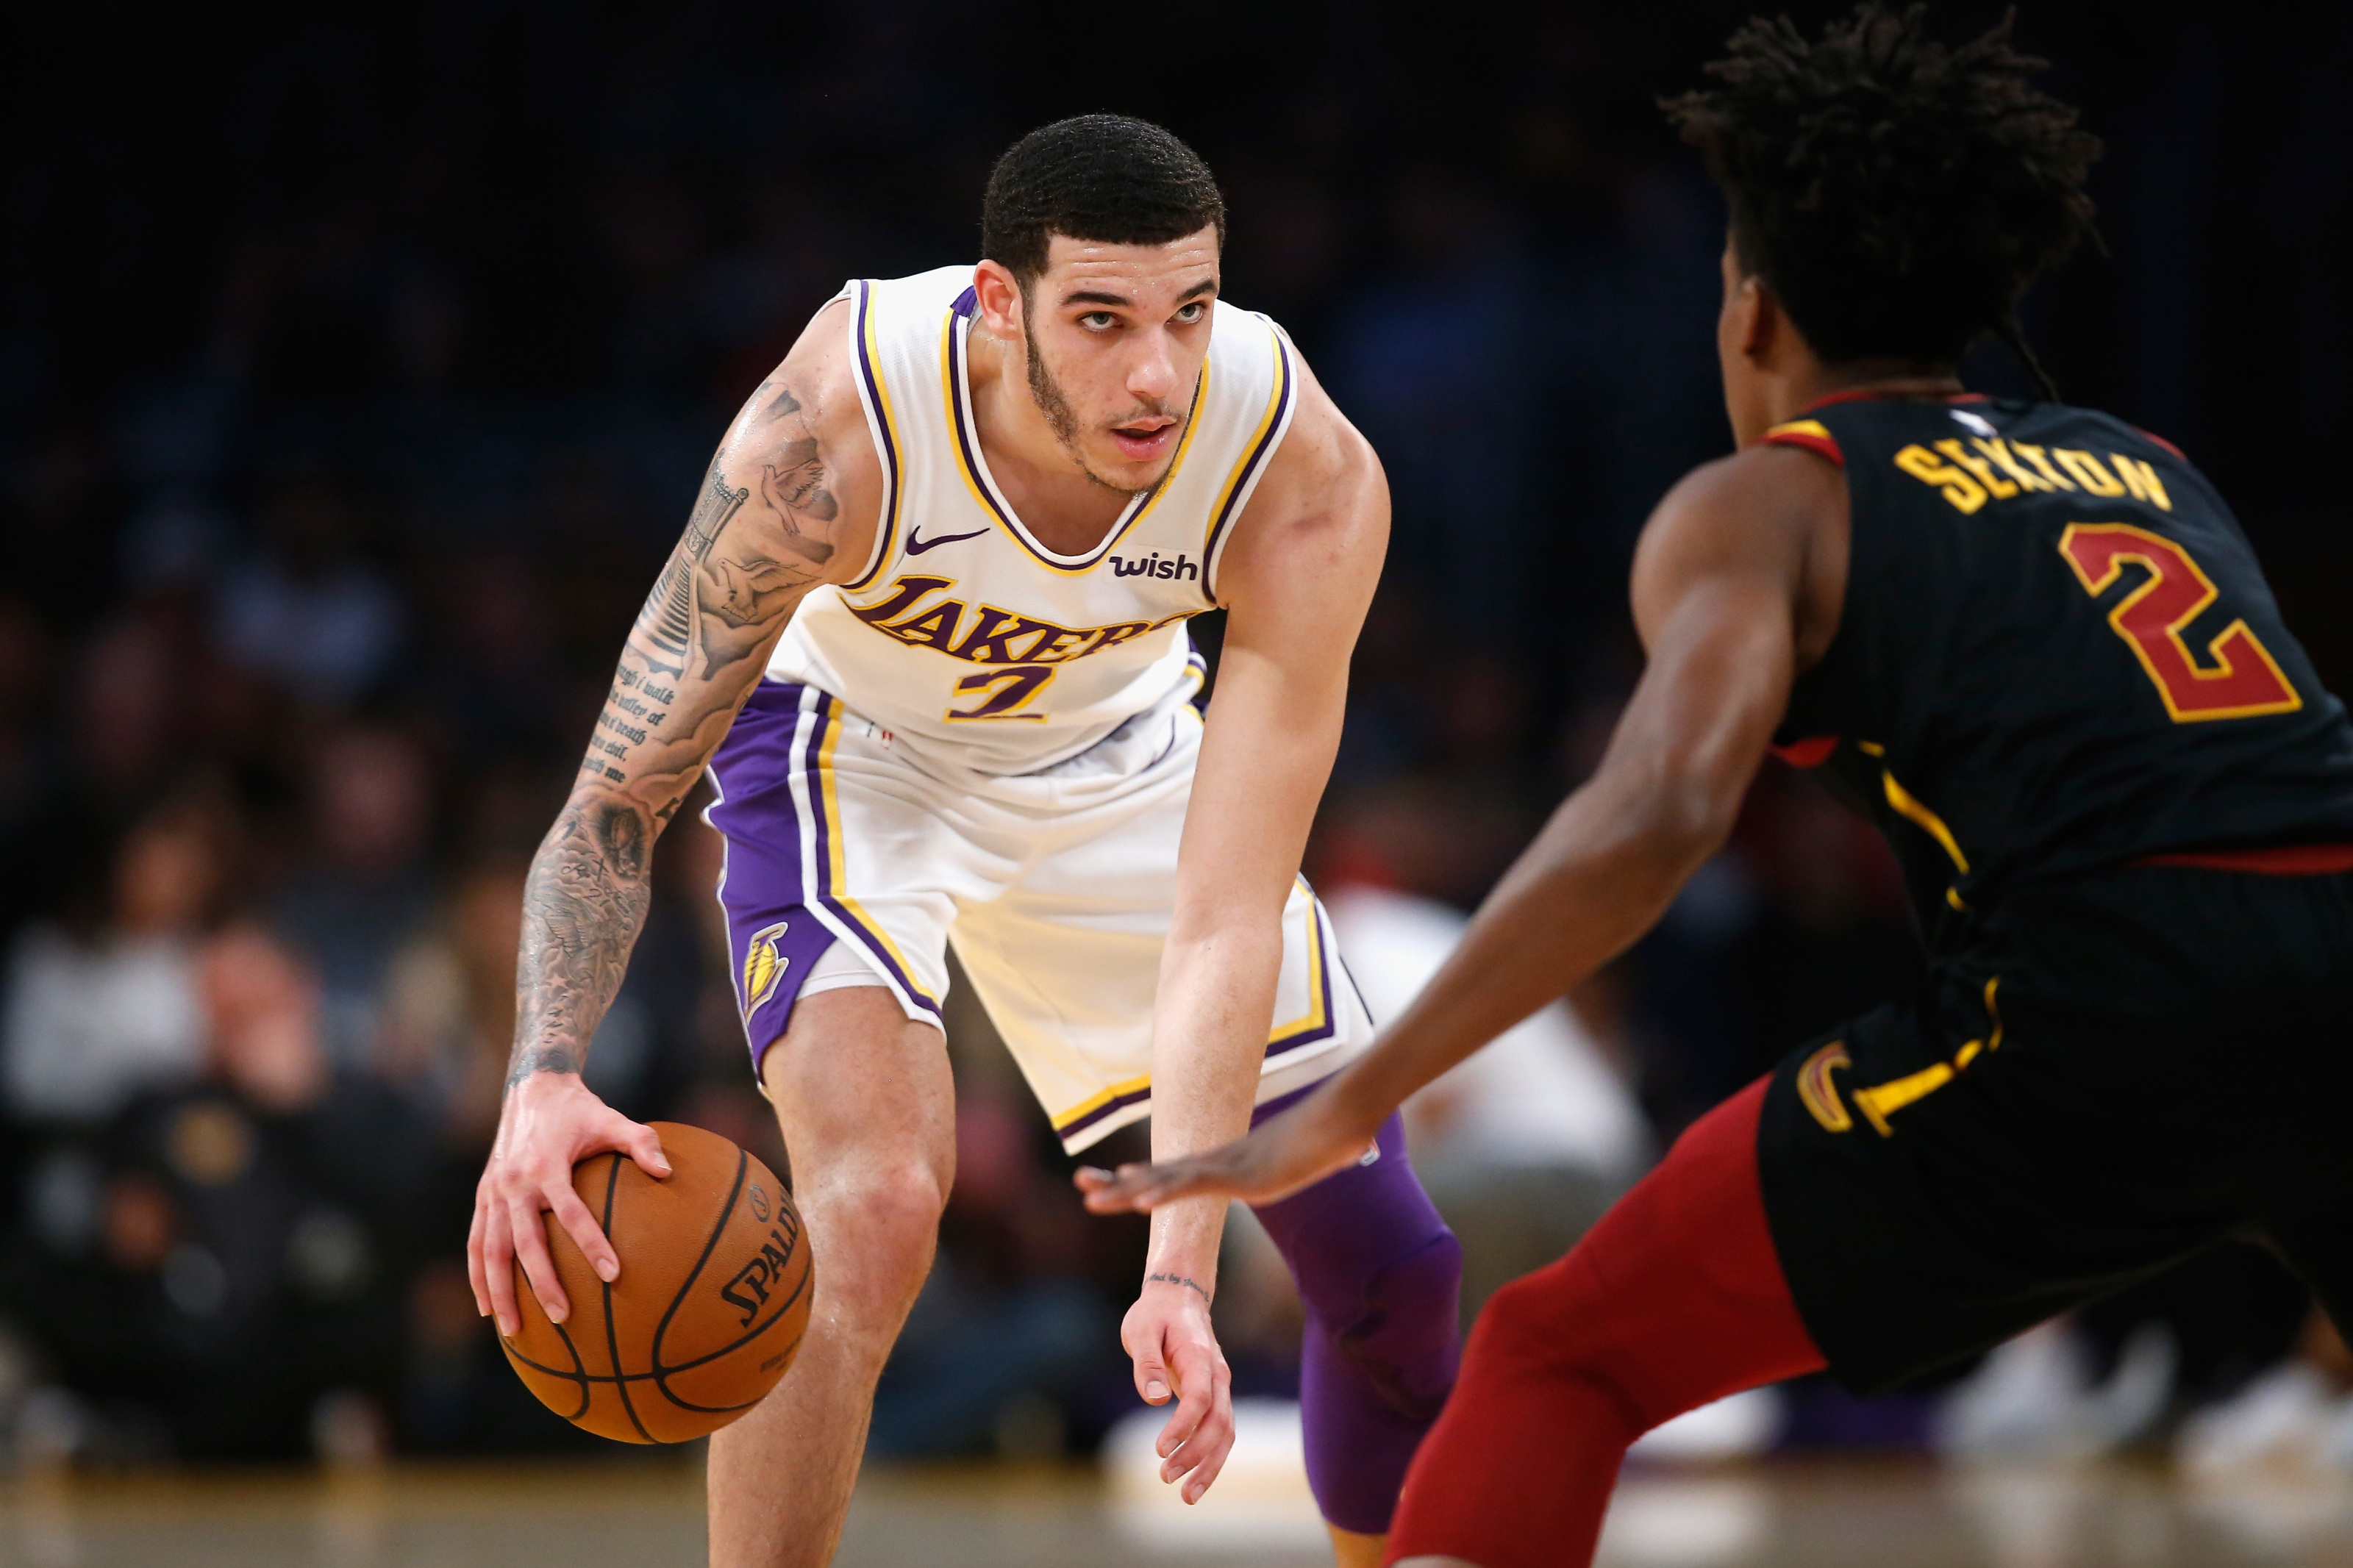 Los Angeles Lakers will go on a big run once Lonzo Ball returns